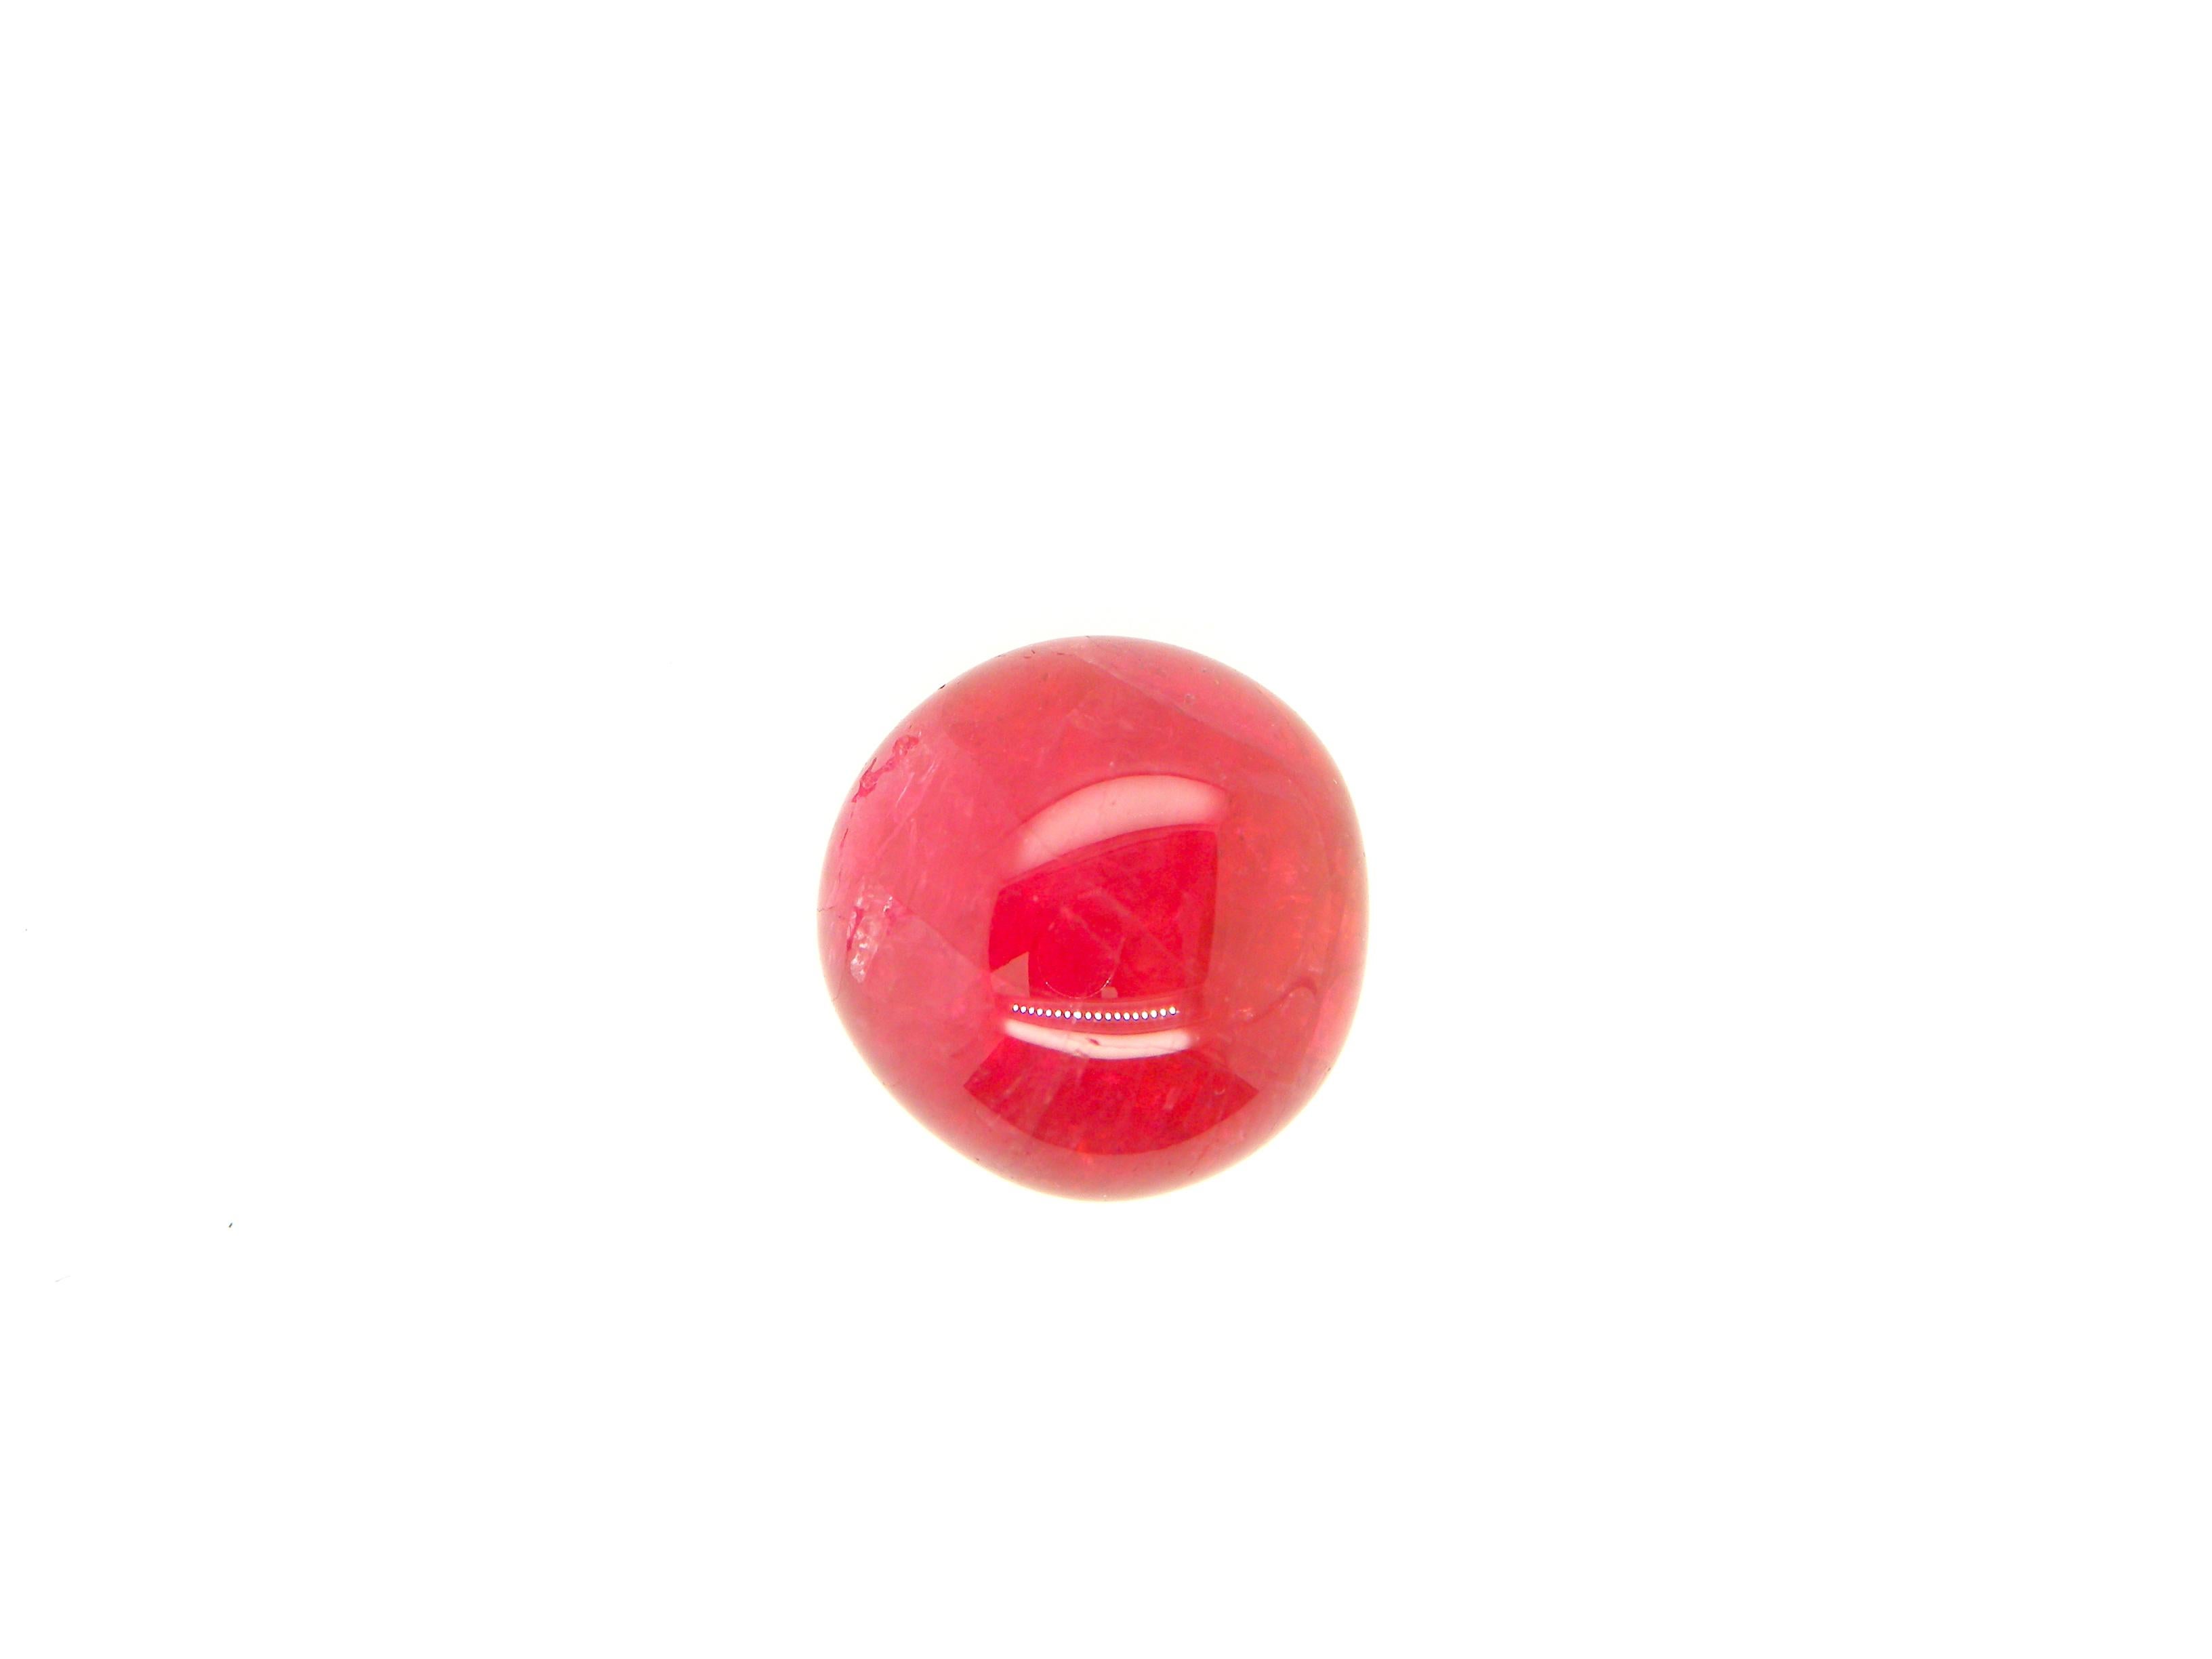 18 Carat Burma No Heat Red Spinel Cabochon:

A beautiful gem, it is a 18 carat unheated Burmese red spinel cabochon. Hailing from the historic Mogok mines in Burma, the spinel possesses an intense red colour saturation, with good lustre and